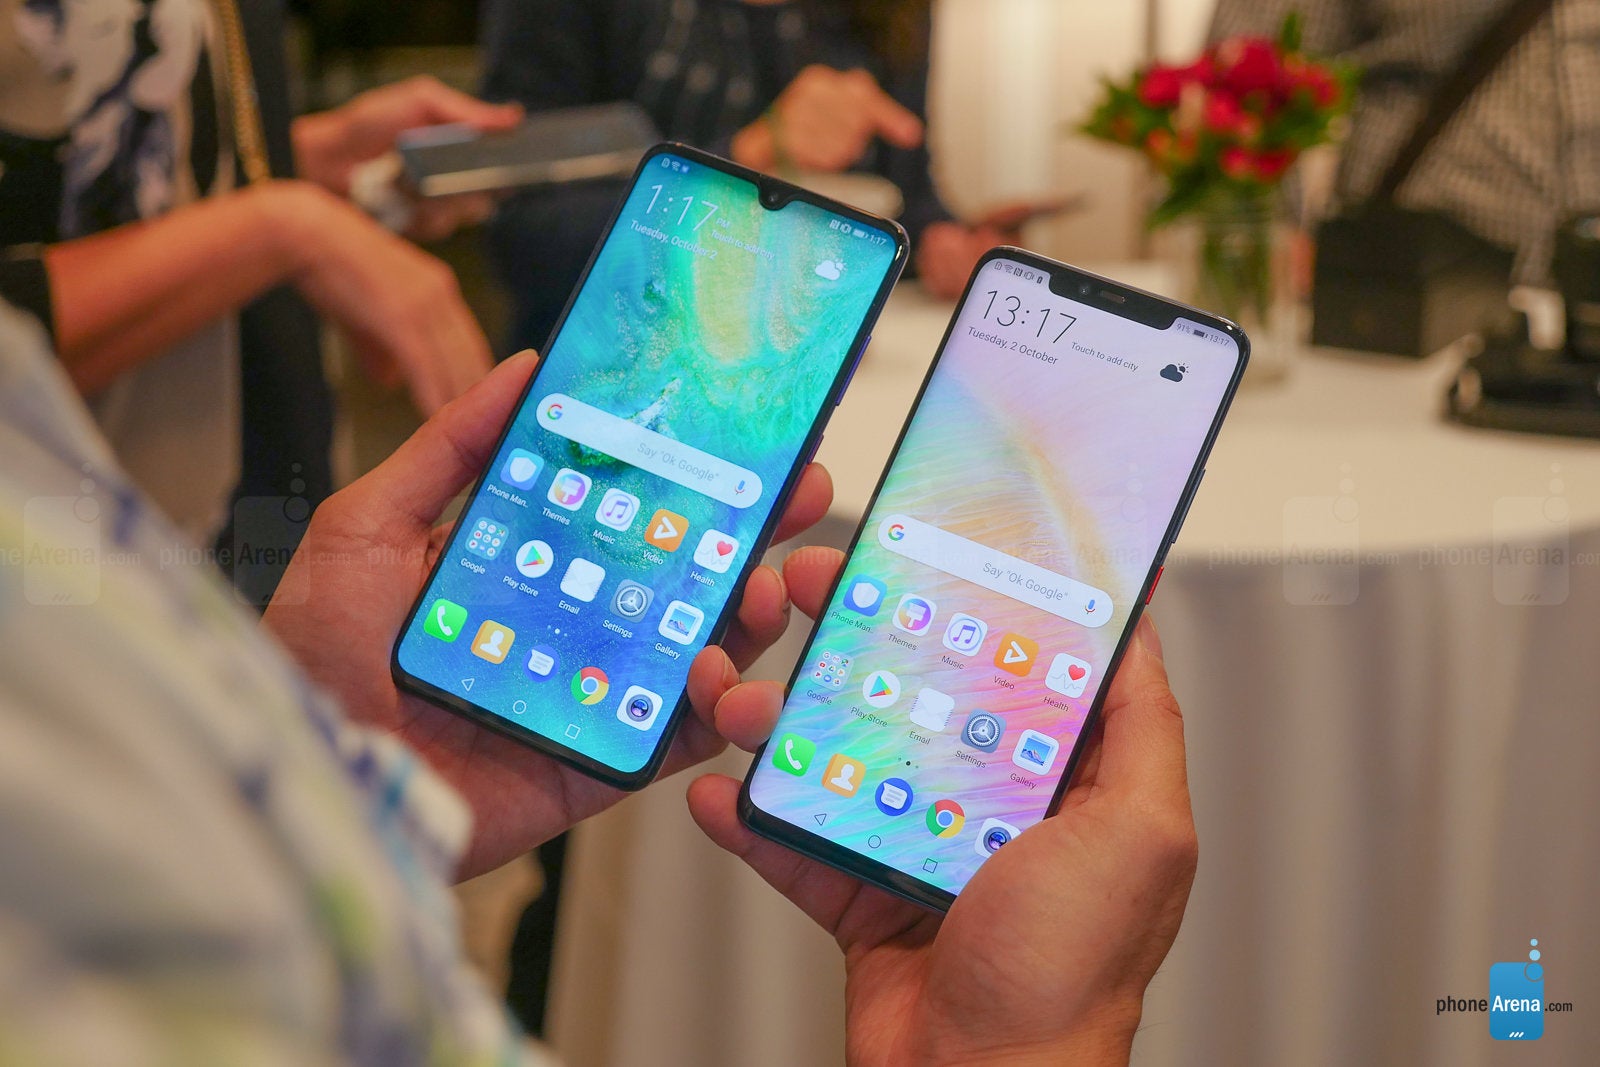 Huawei Mate 20 & Mate 20 Pro hands-on